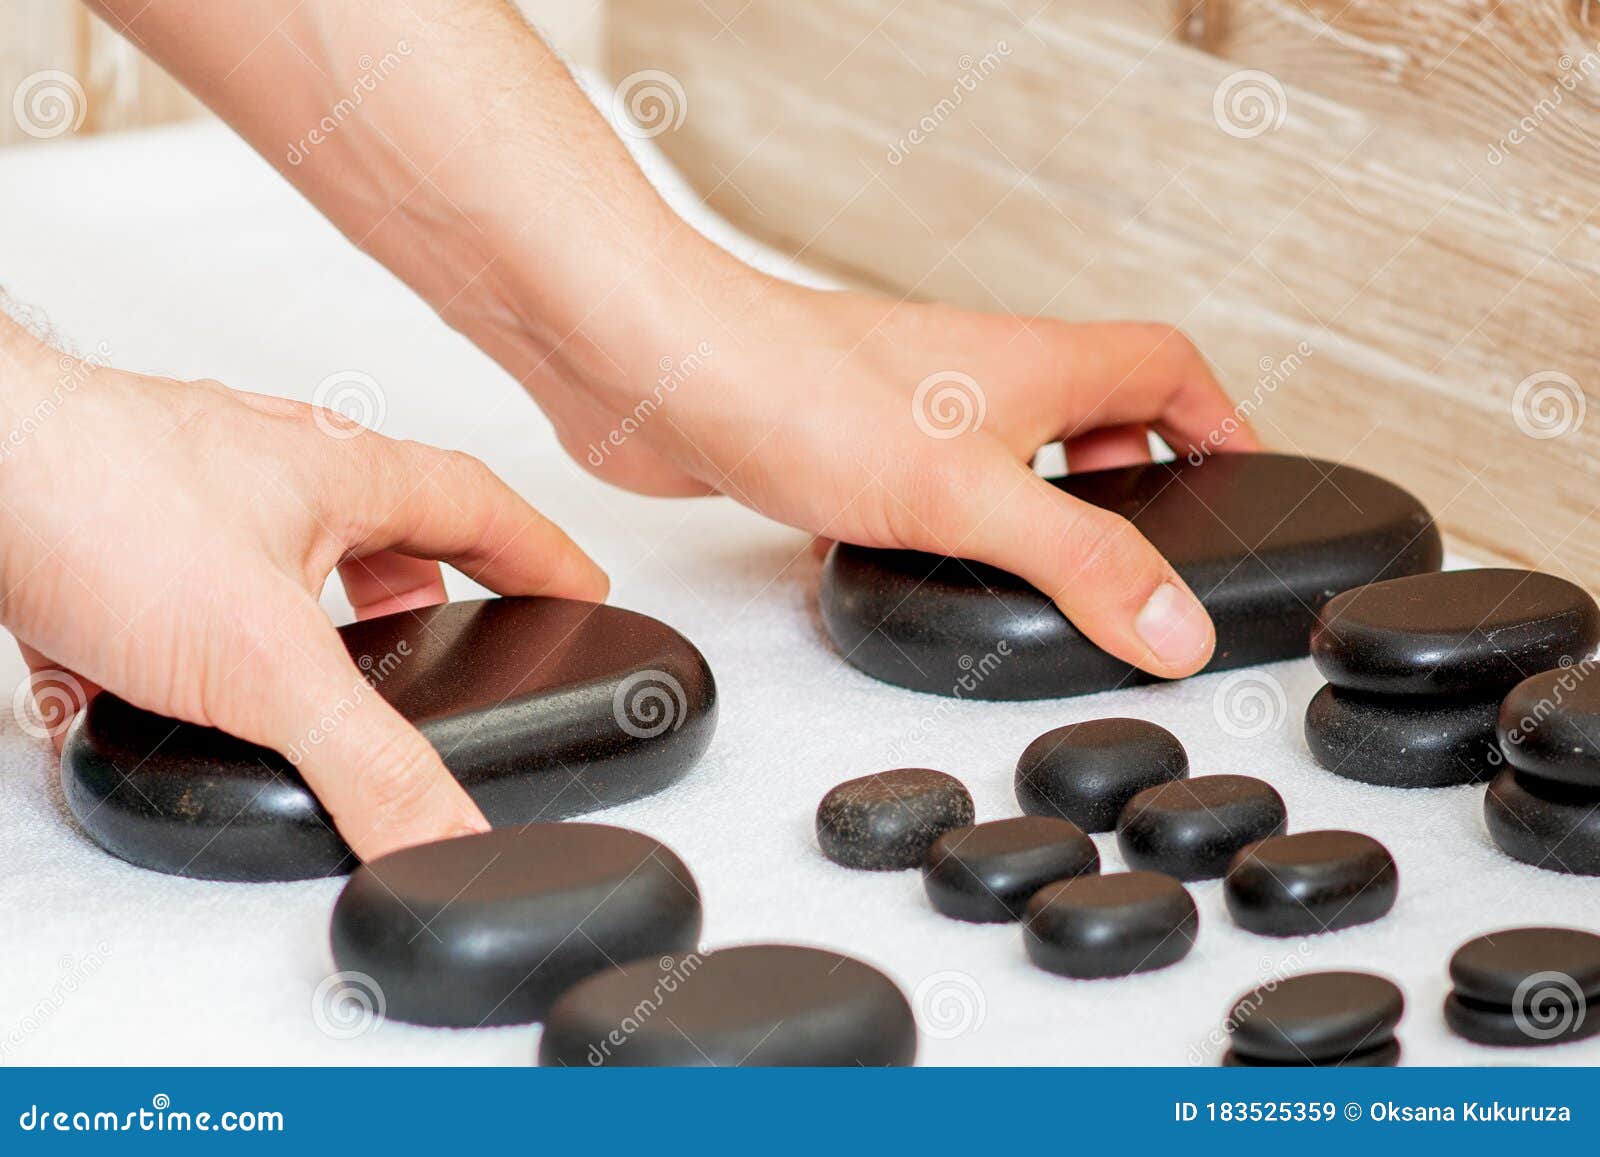 Hands Of Massager Taking Spa Stones Stock Image Image Of Massage